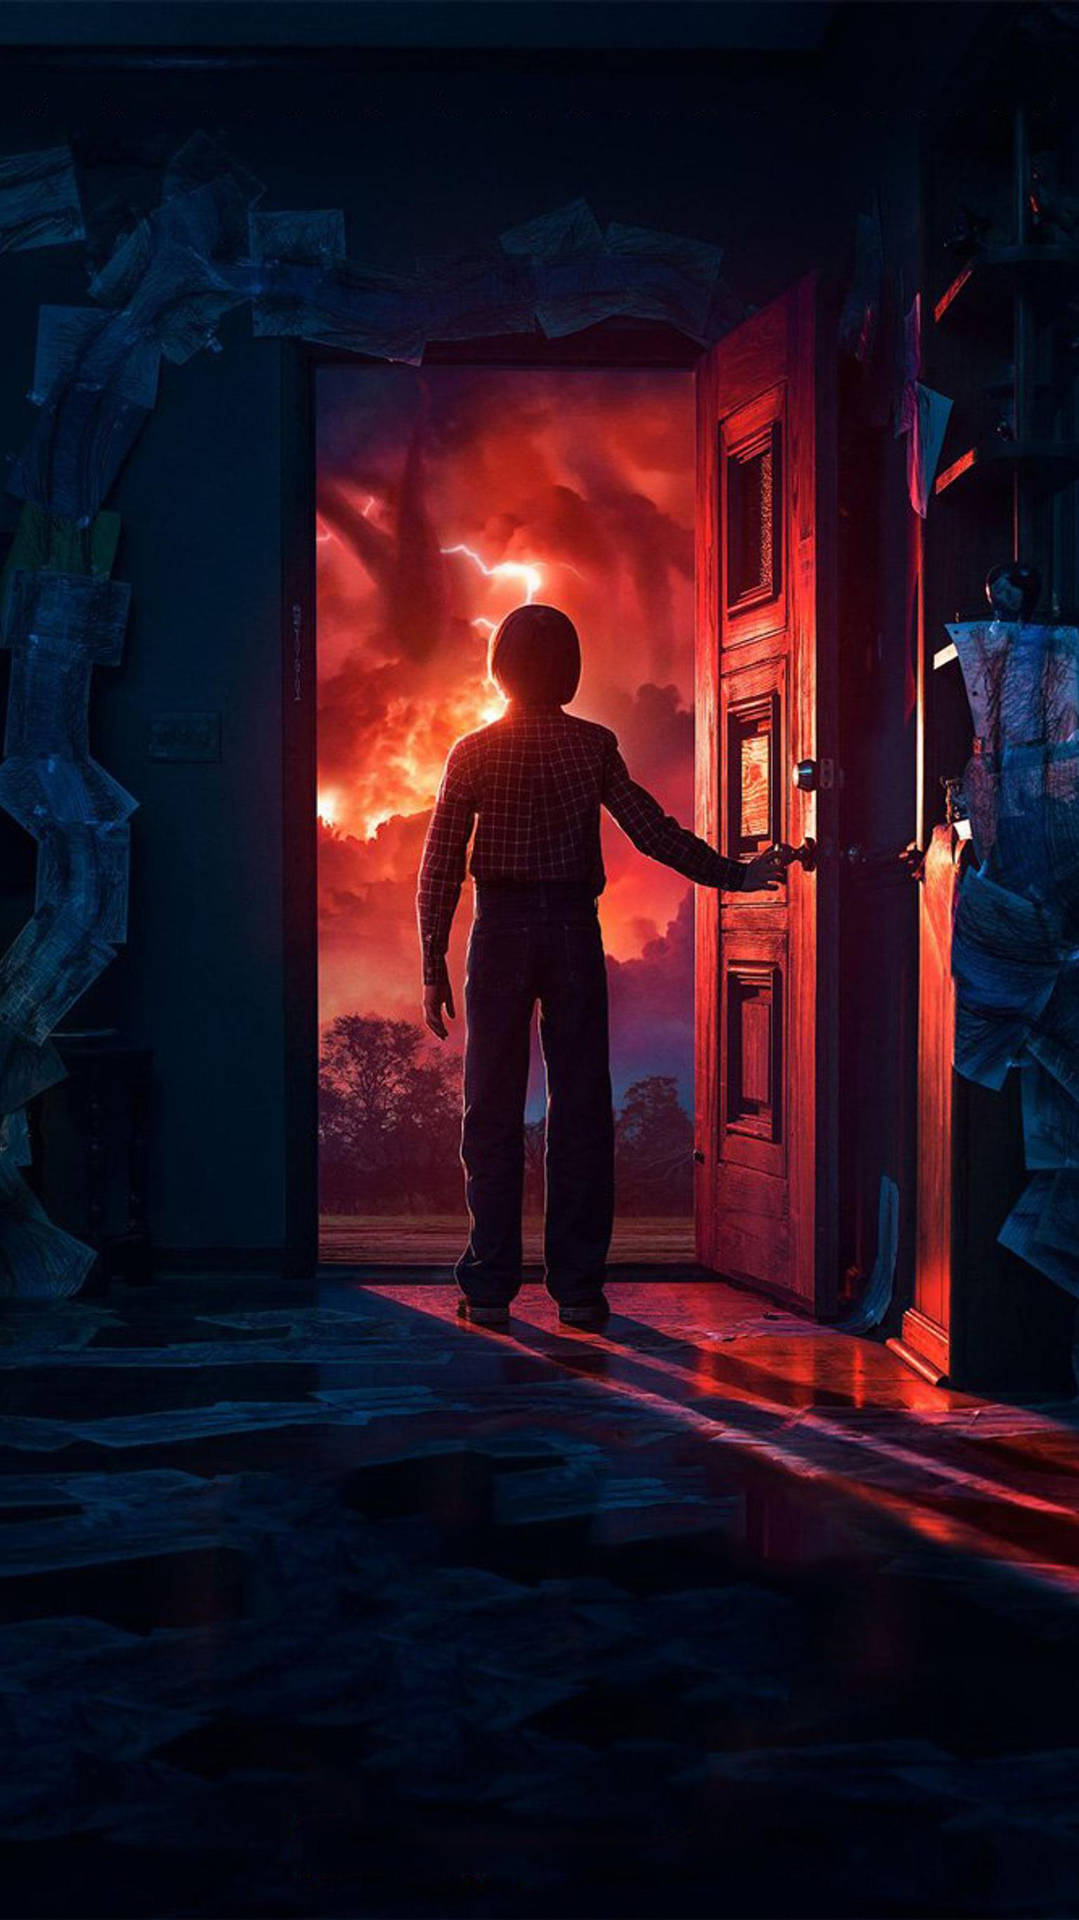 Stranger Things Cast Will Byers At The Door Wallpaper